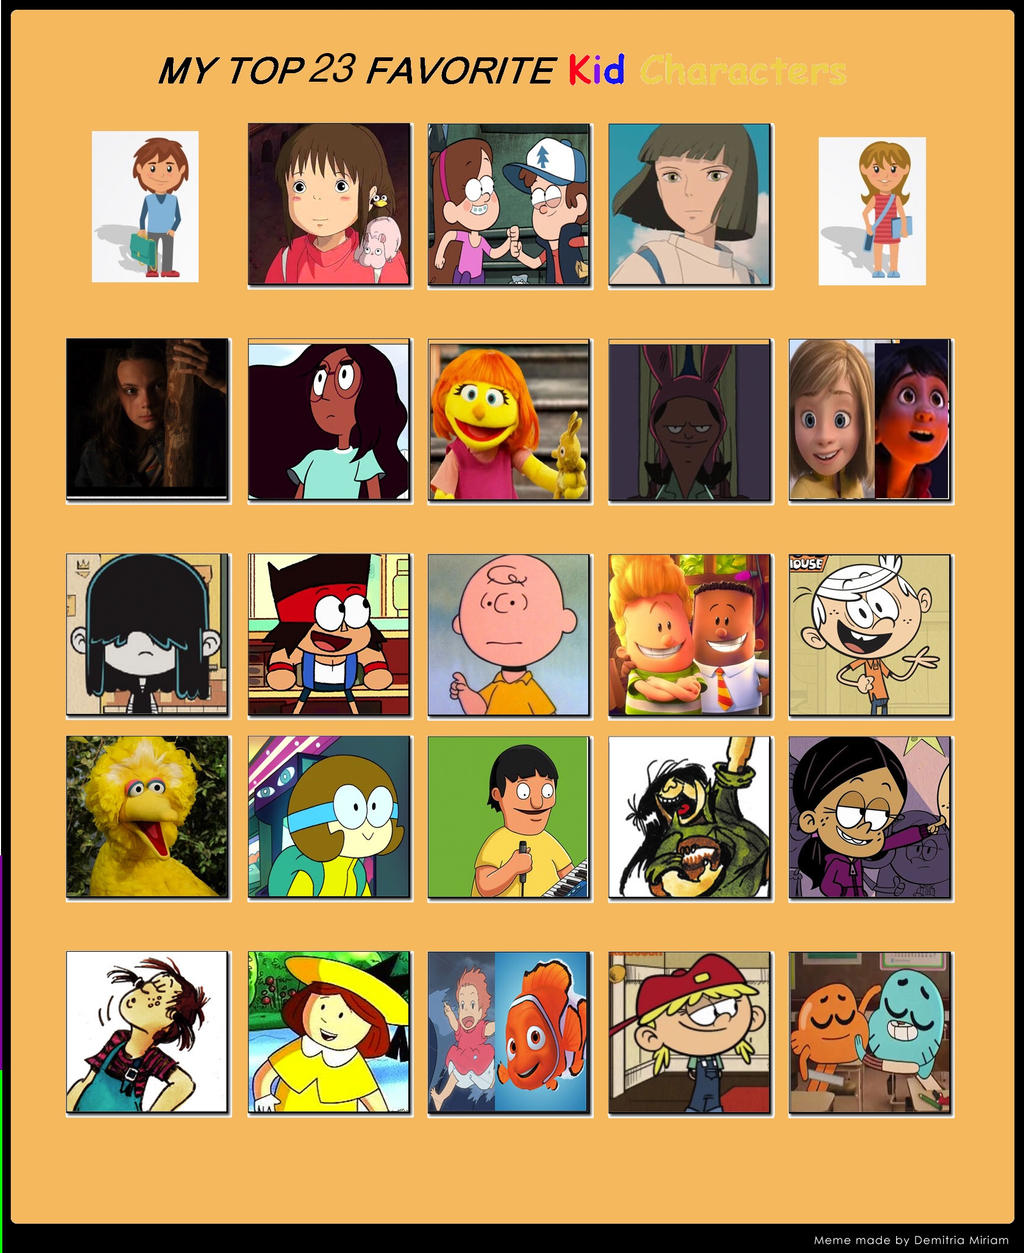 Your top three favorite characters? And which episode got you